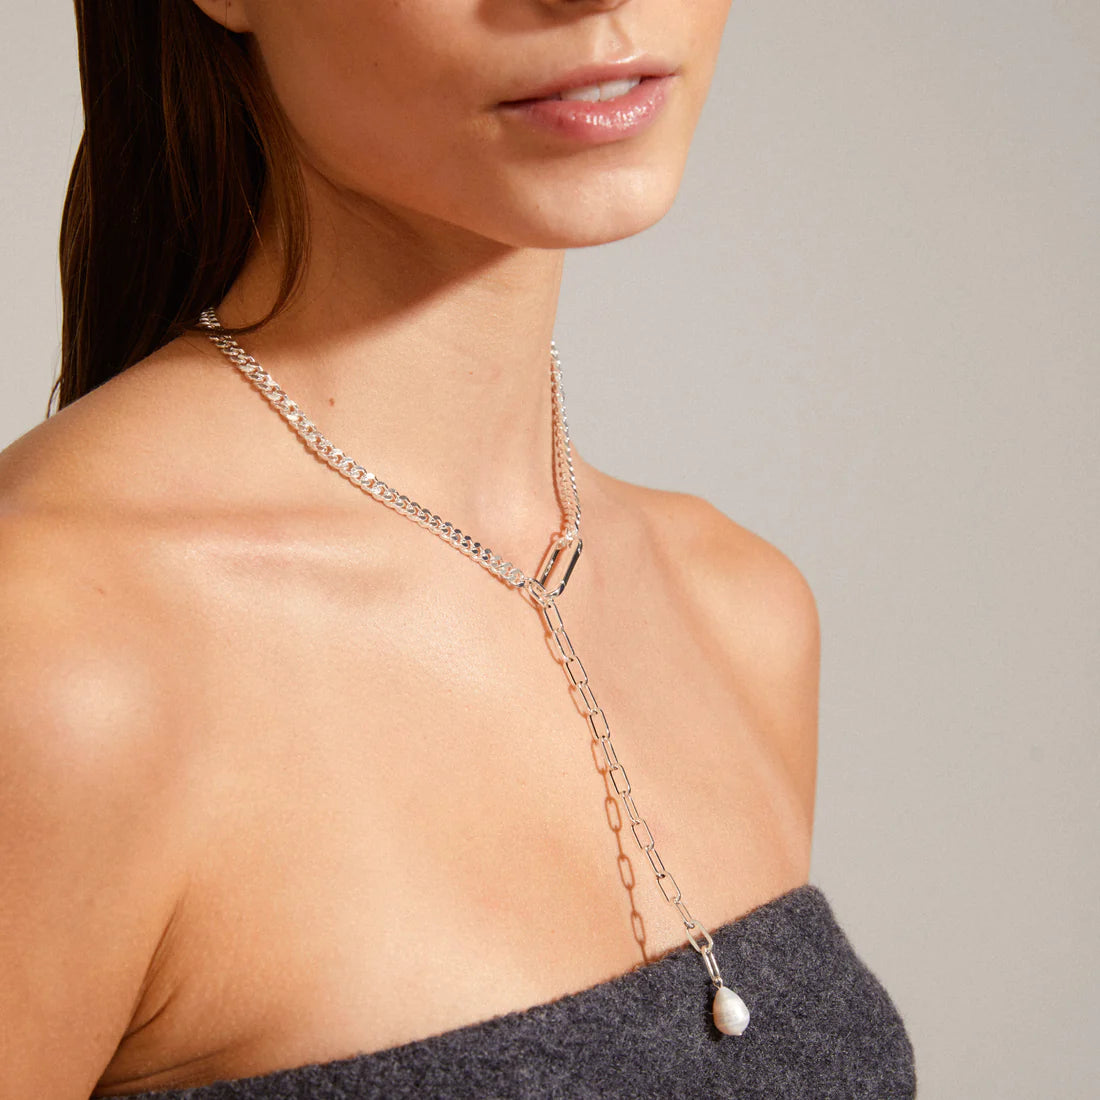 Heat Chain Necklace - silver